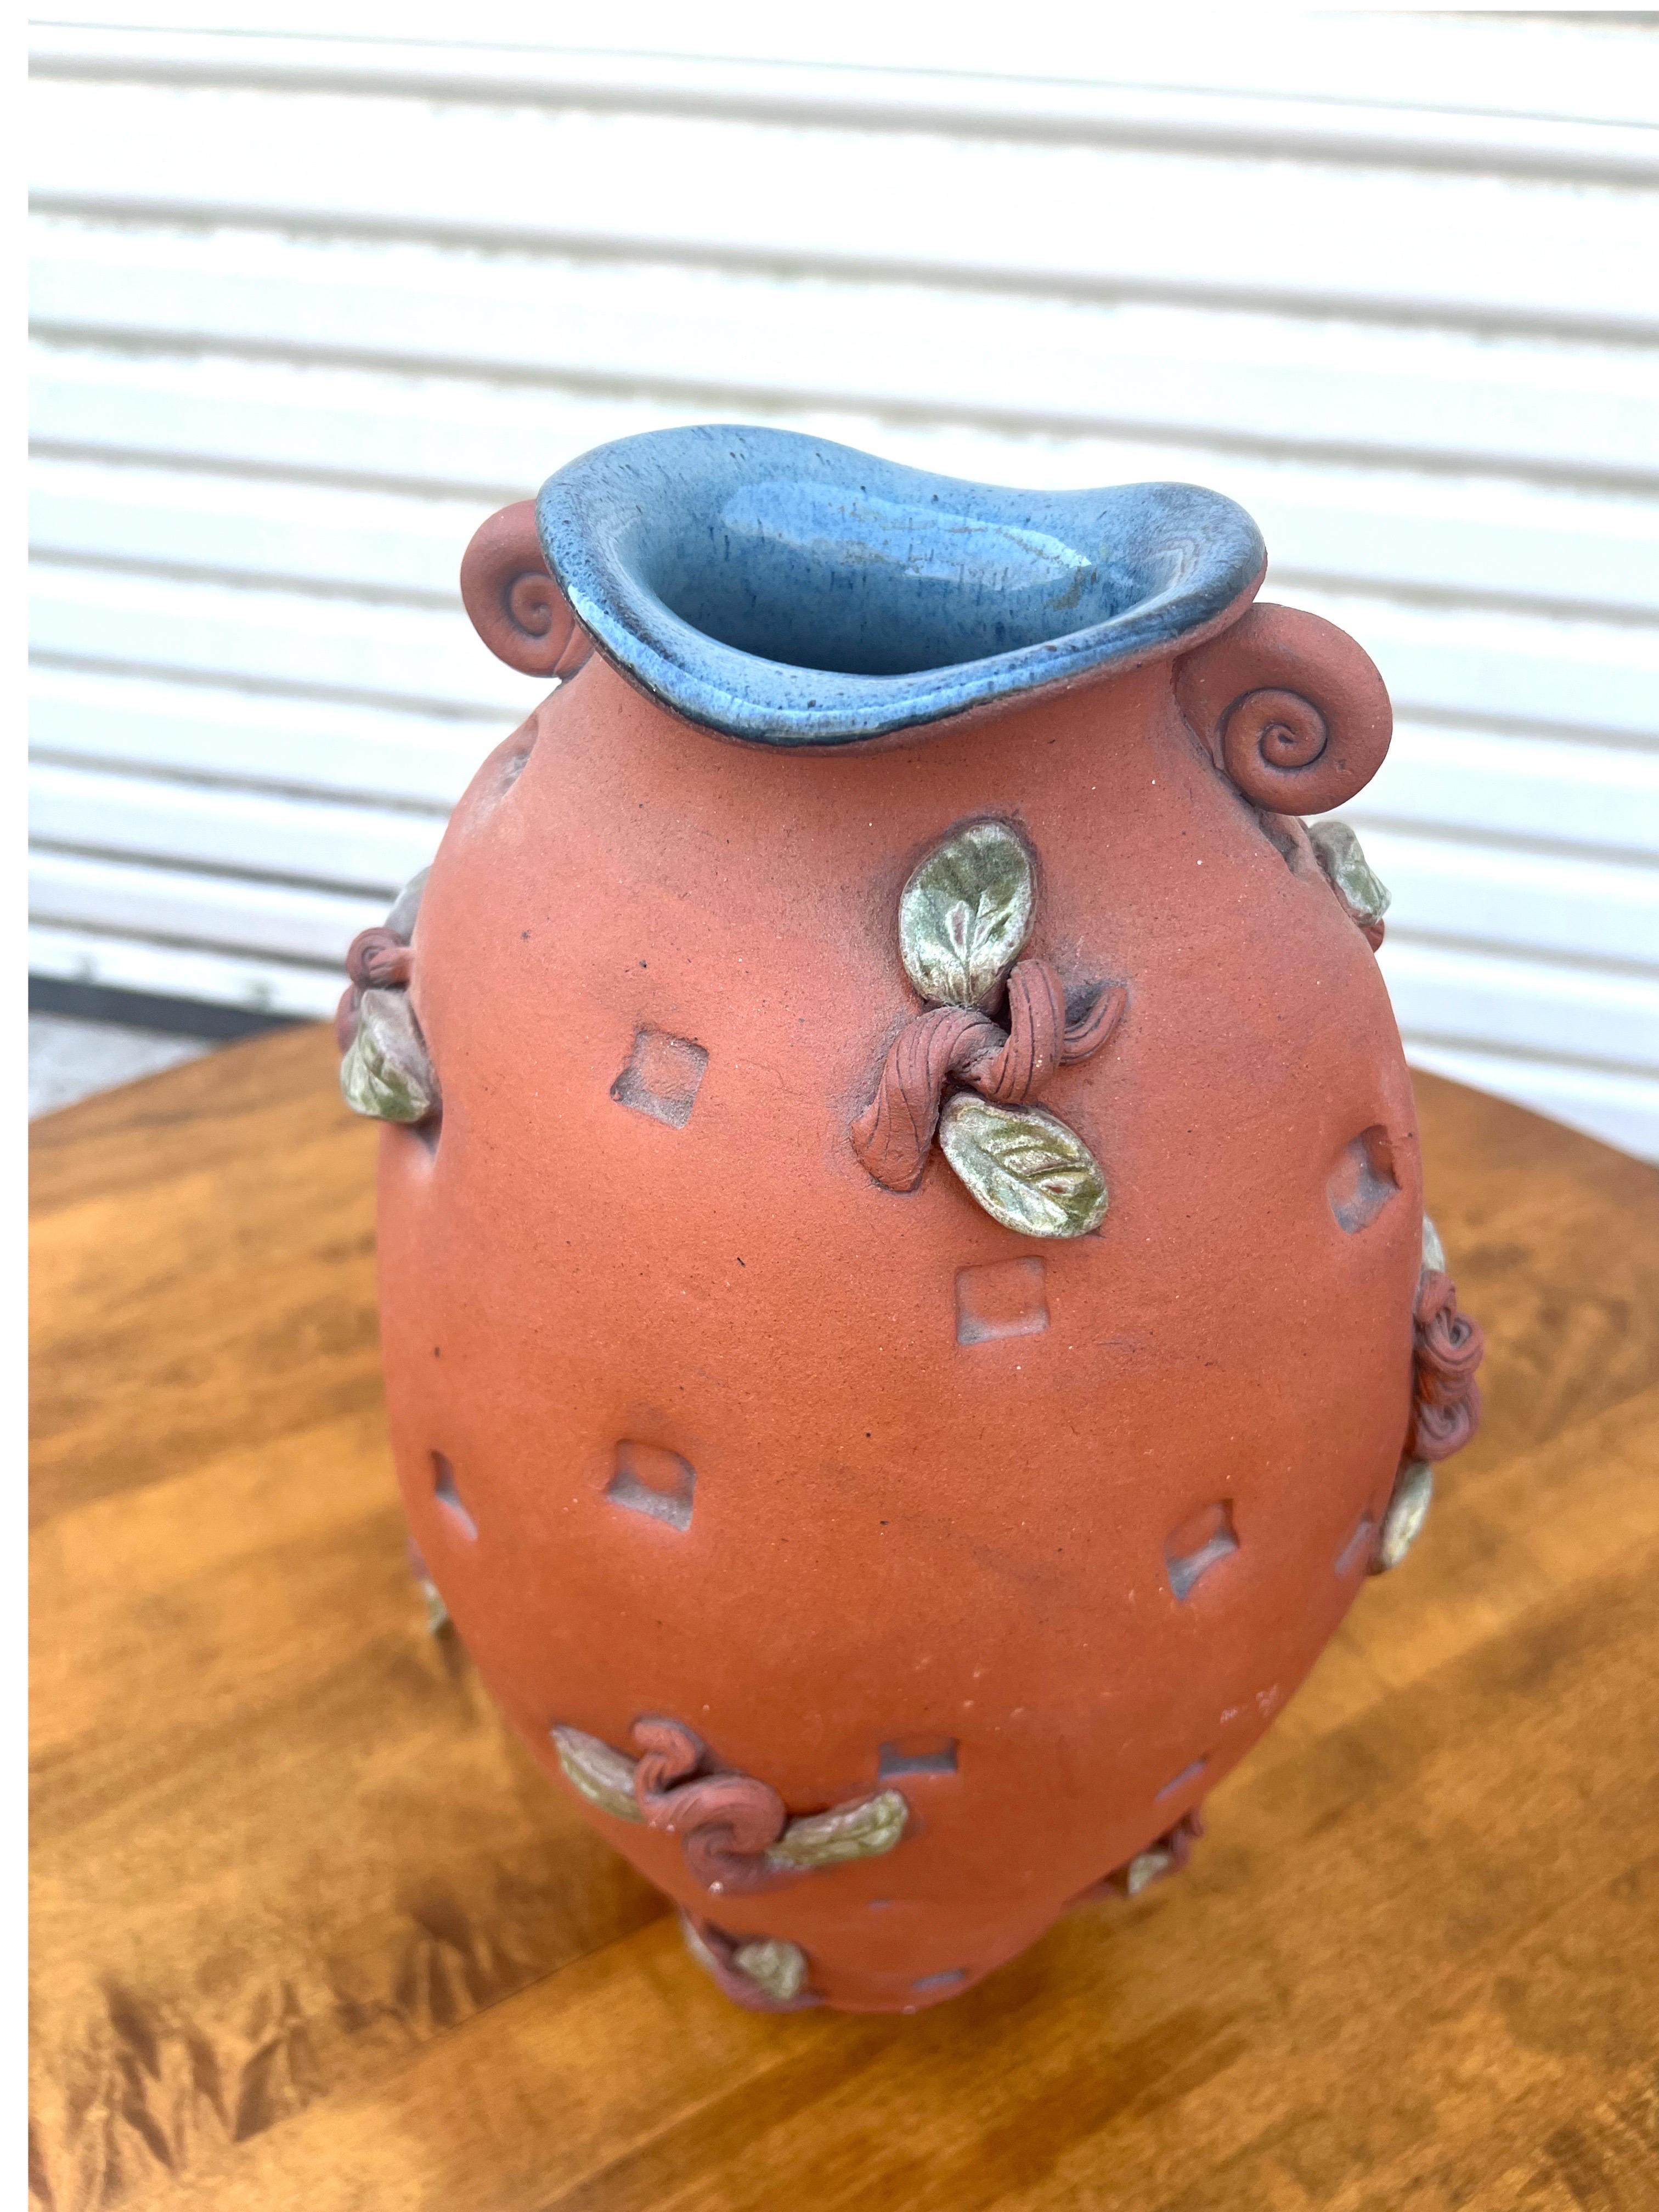 This stunning studio pottery terracotta vase has beautiful applied leaves and stems.  The inside of the vase has a lovely blue high glaze, making for a really nice contrast.